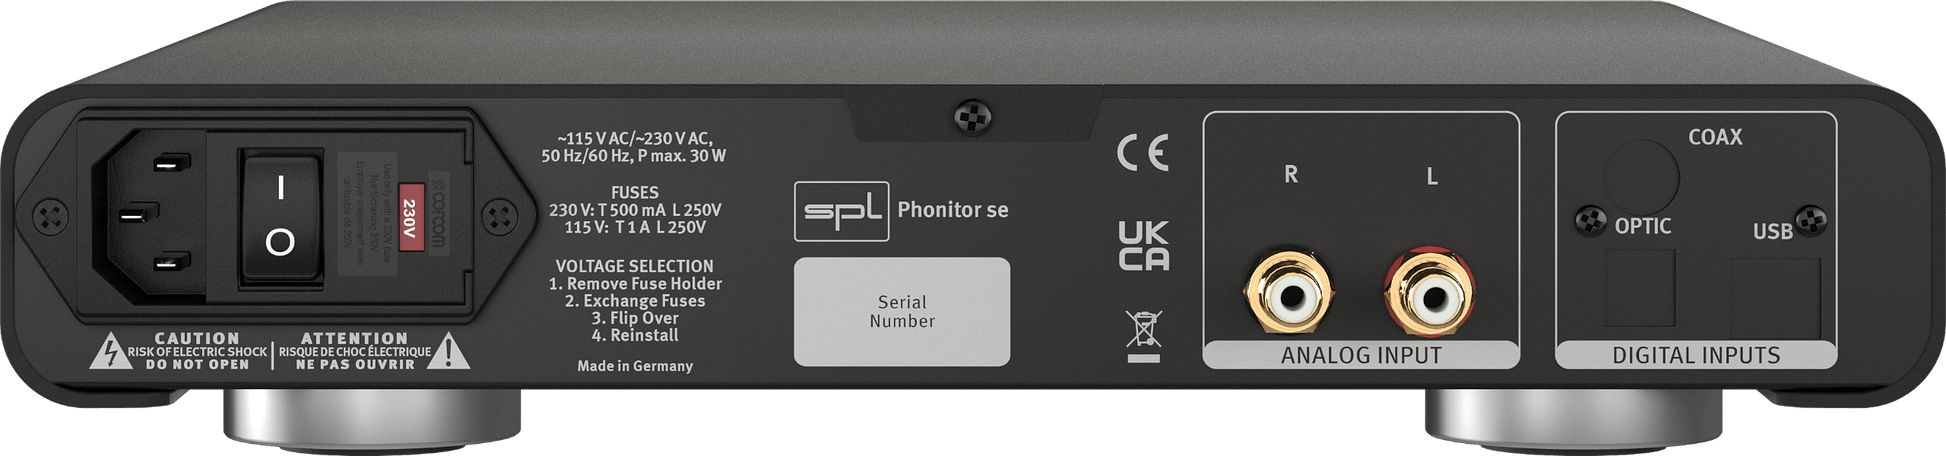 SPL Audio Phonitor se Headphone Amplifier with optional DAC 768xs. Image shows rear of option without DAC